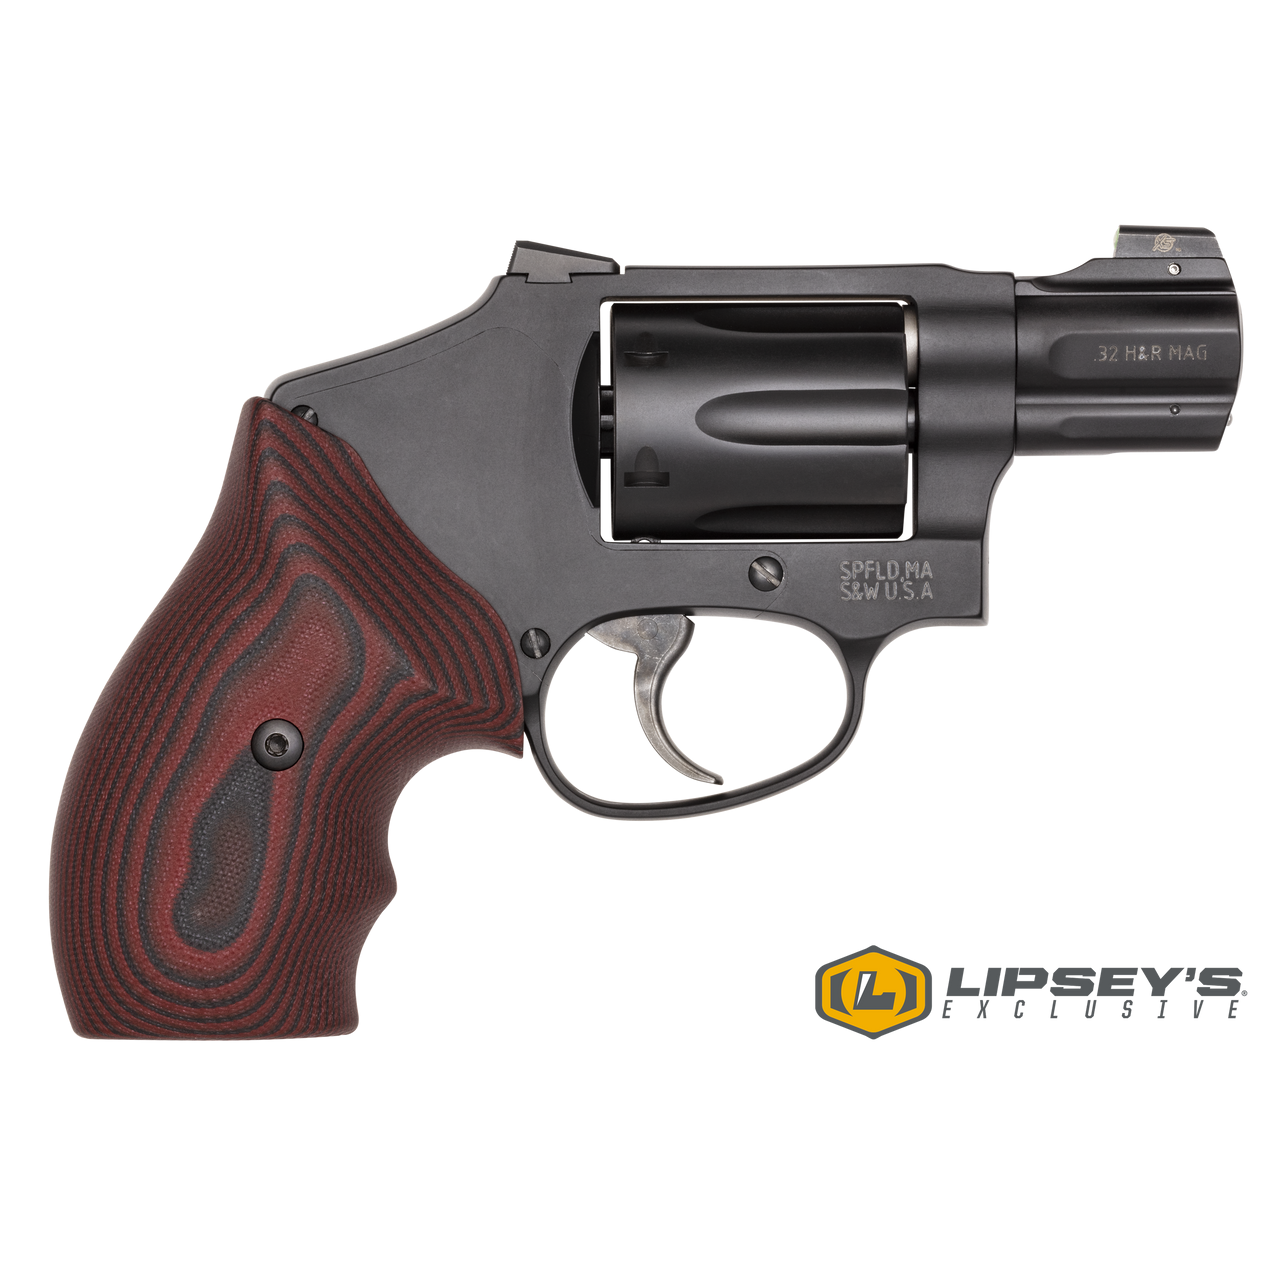 https://www.smith-wesson.com/_next/image?url=https%3A%2F%2Fcdn11.bigcommerce.com%2Fs-c7gr8wg3cg%2Fproducts%2F1006%2Fimages%2F4223%2F14035-sw-OnWhite-Right__74865.1709126951.1280.1280.png%3Fc%3D1&w=3840&q=75